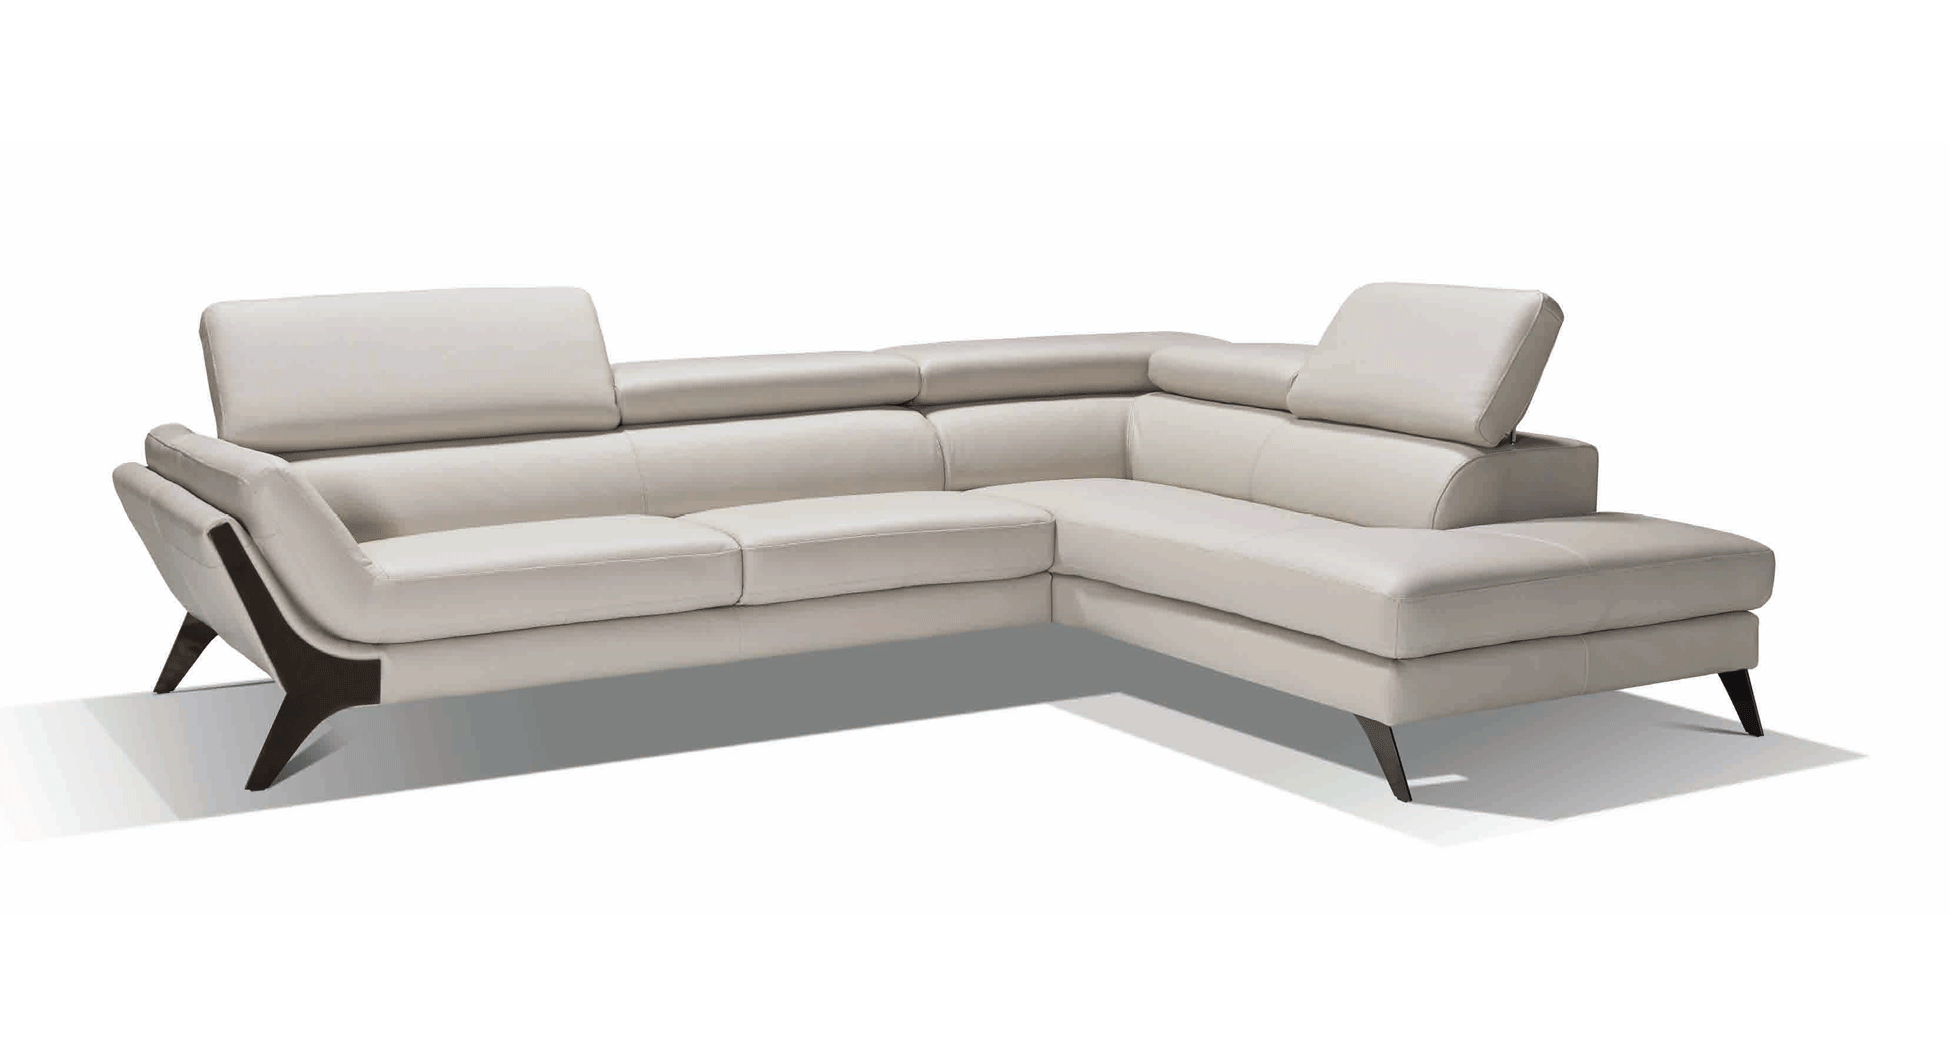 Living Room Furniture Reclining and Sliding Seats Sets Moncalieri Living room